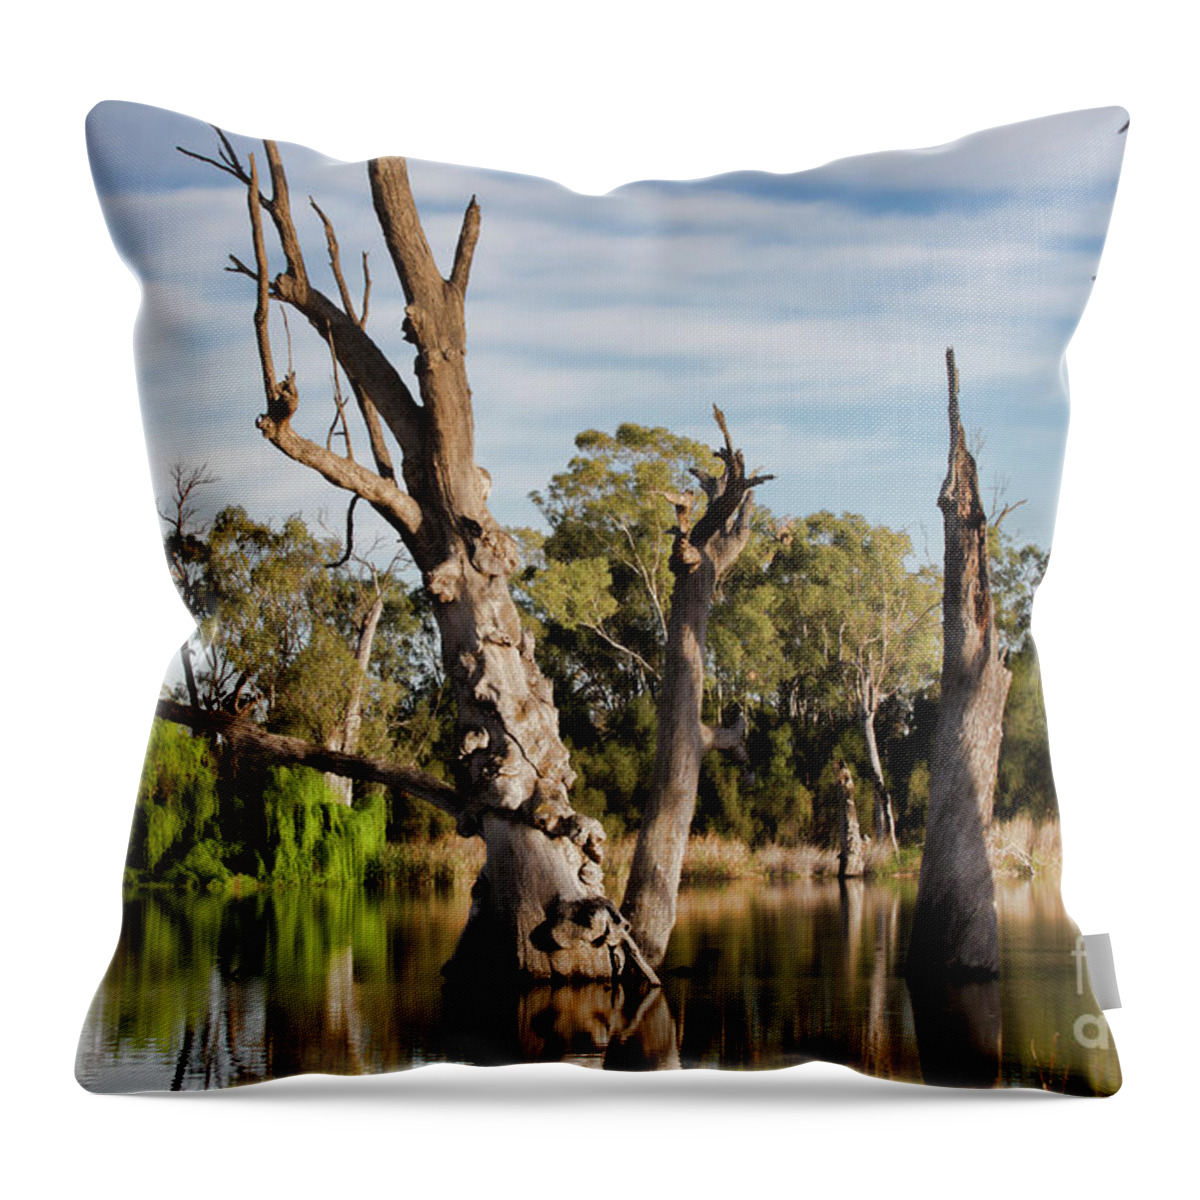 Trees Throw Pillow featuring the photograph Contrasted by Douglas Barnard